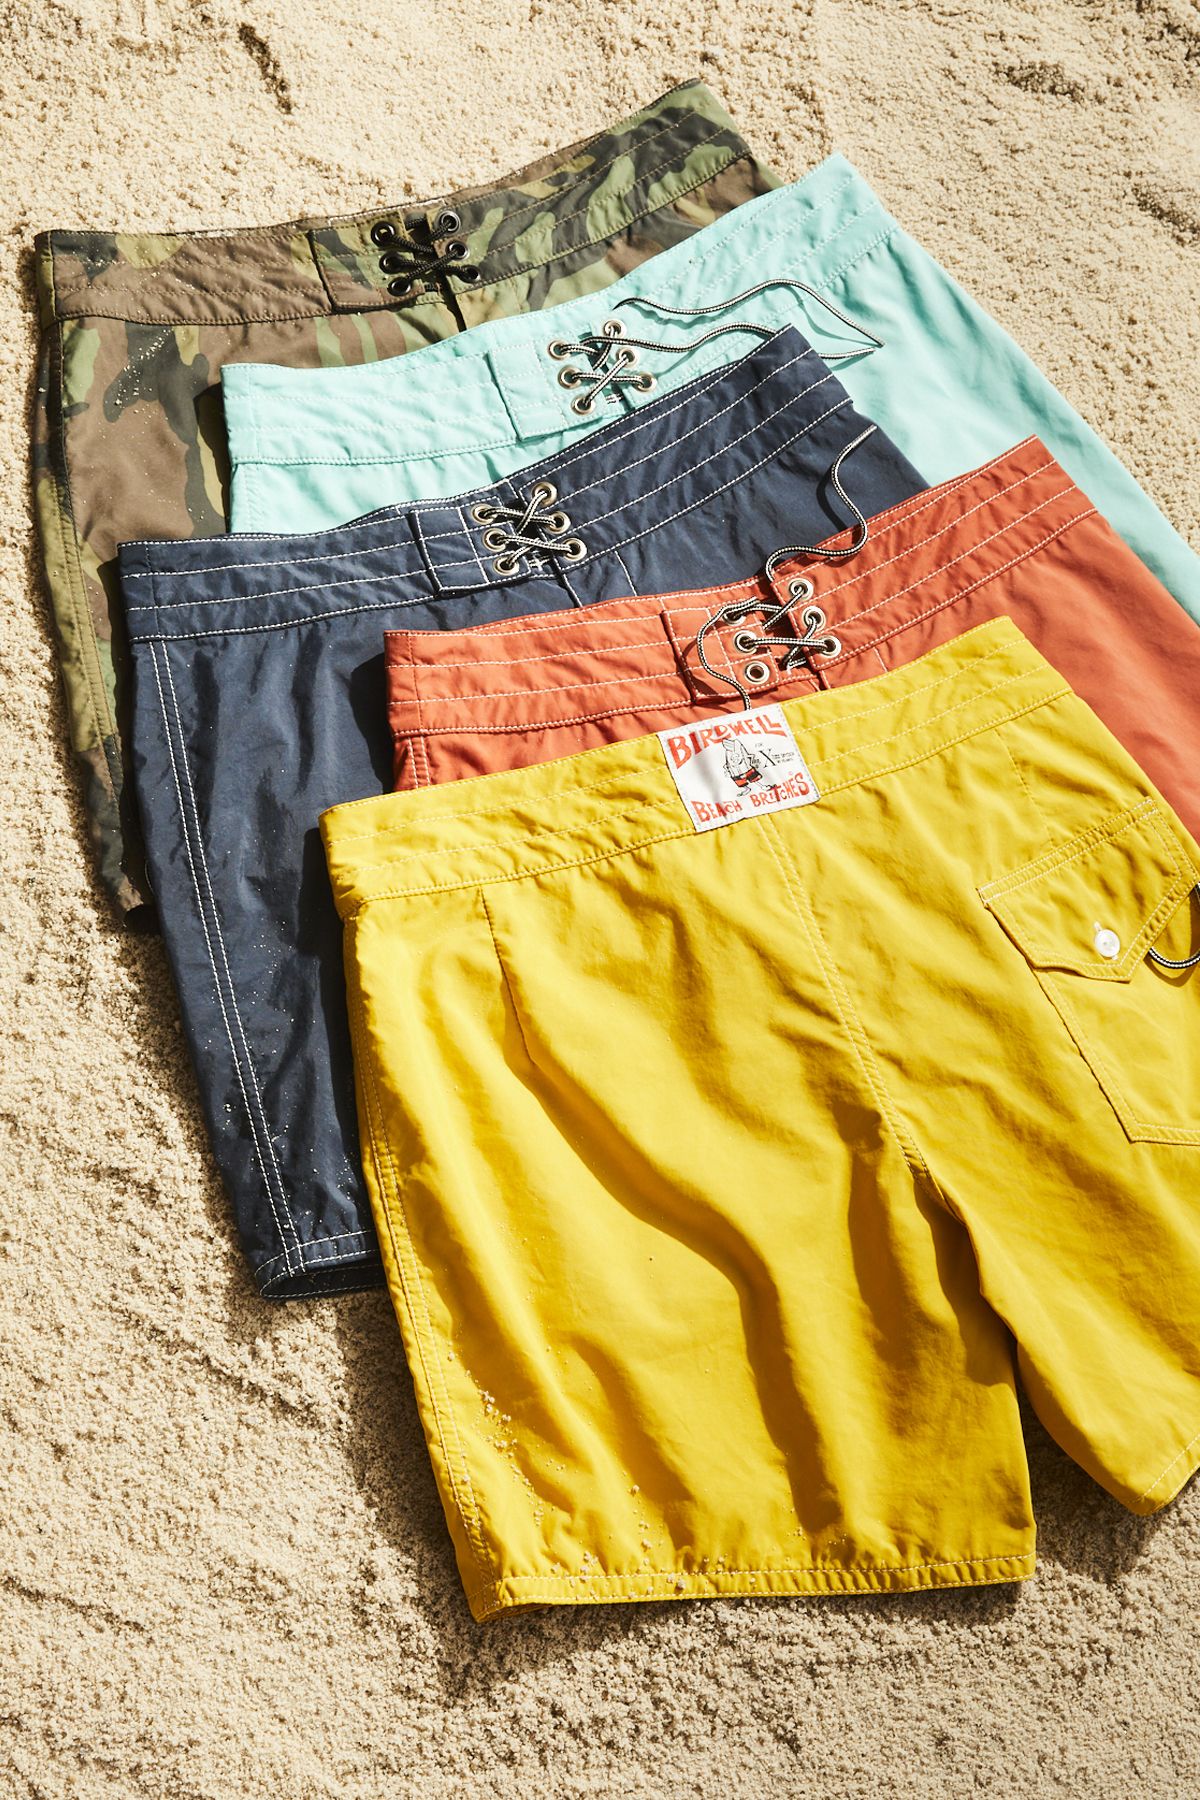 Todd Snyder Birdwell Bord Shorts - Where to Buy, Price, Details